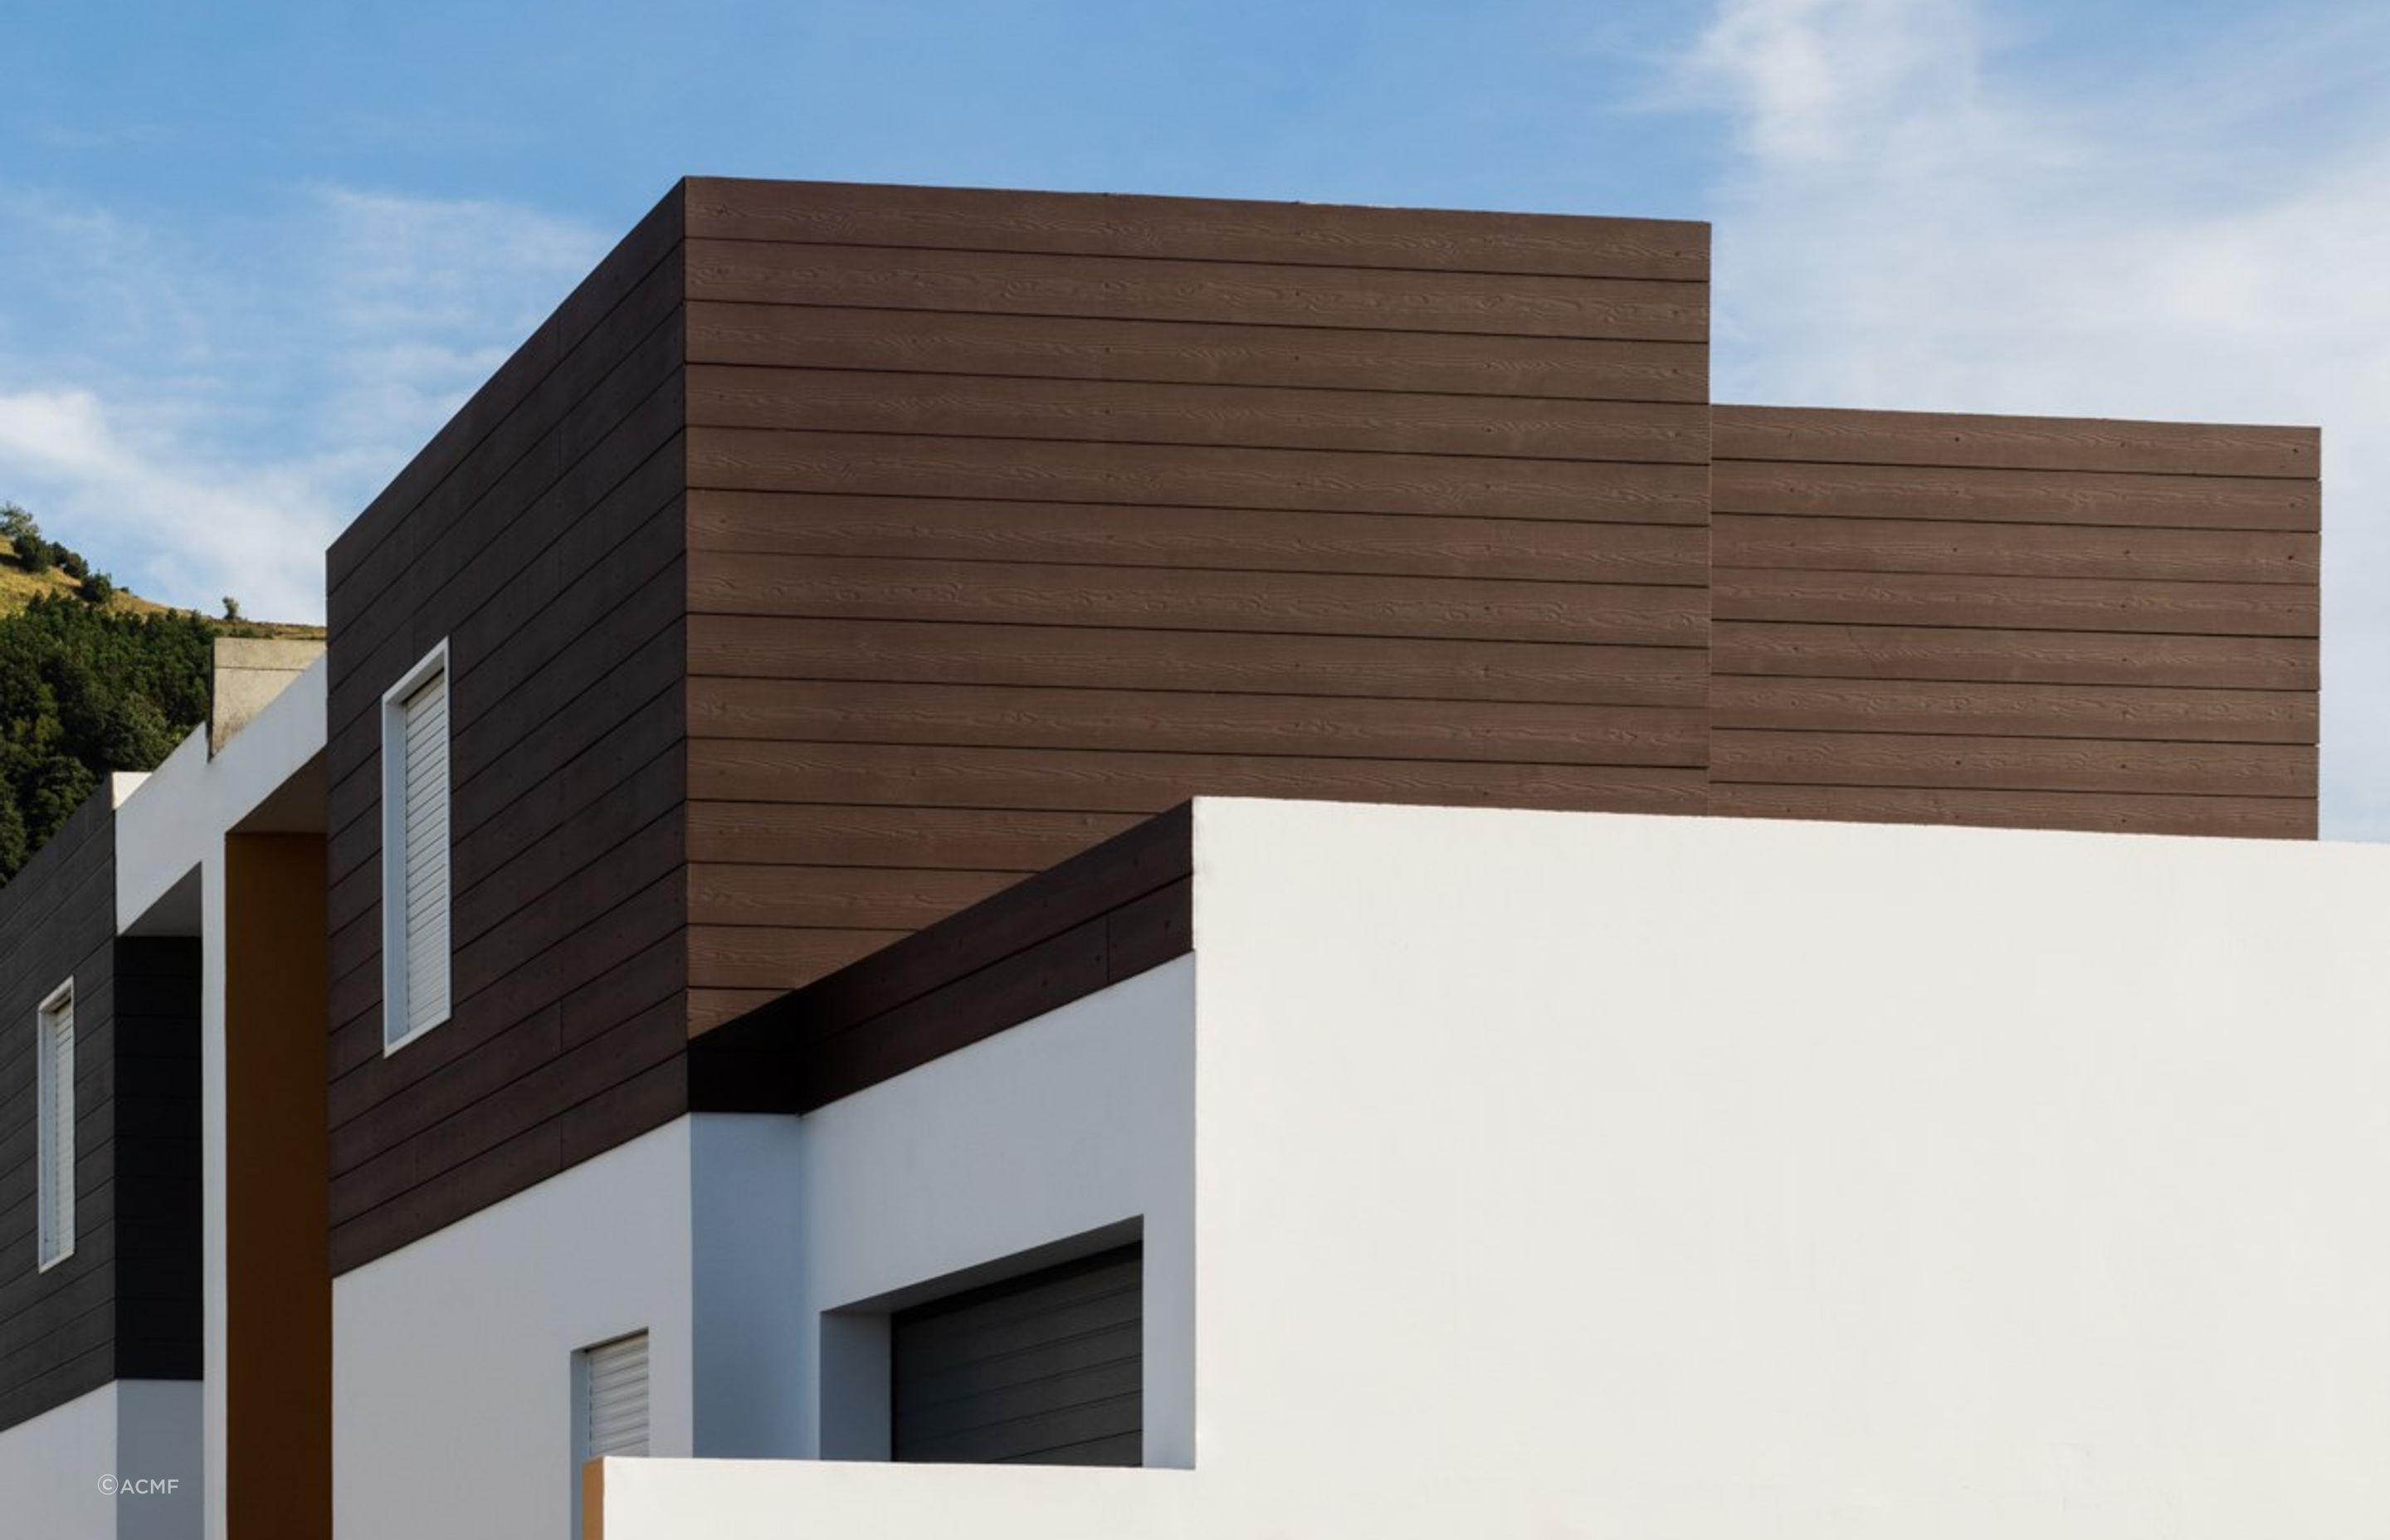 The low maintenance and stylish Cedral Fibre Cement Cladding.